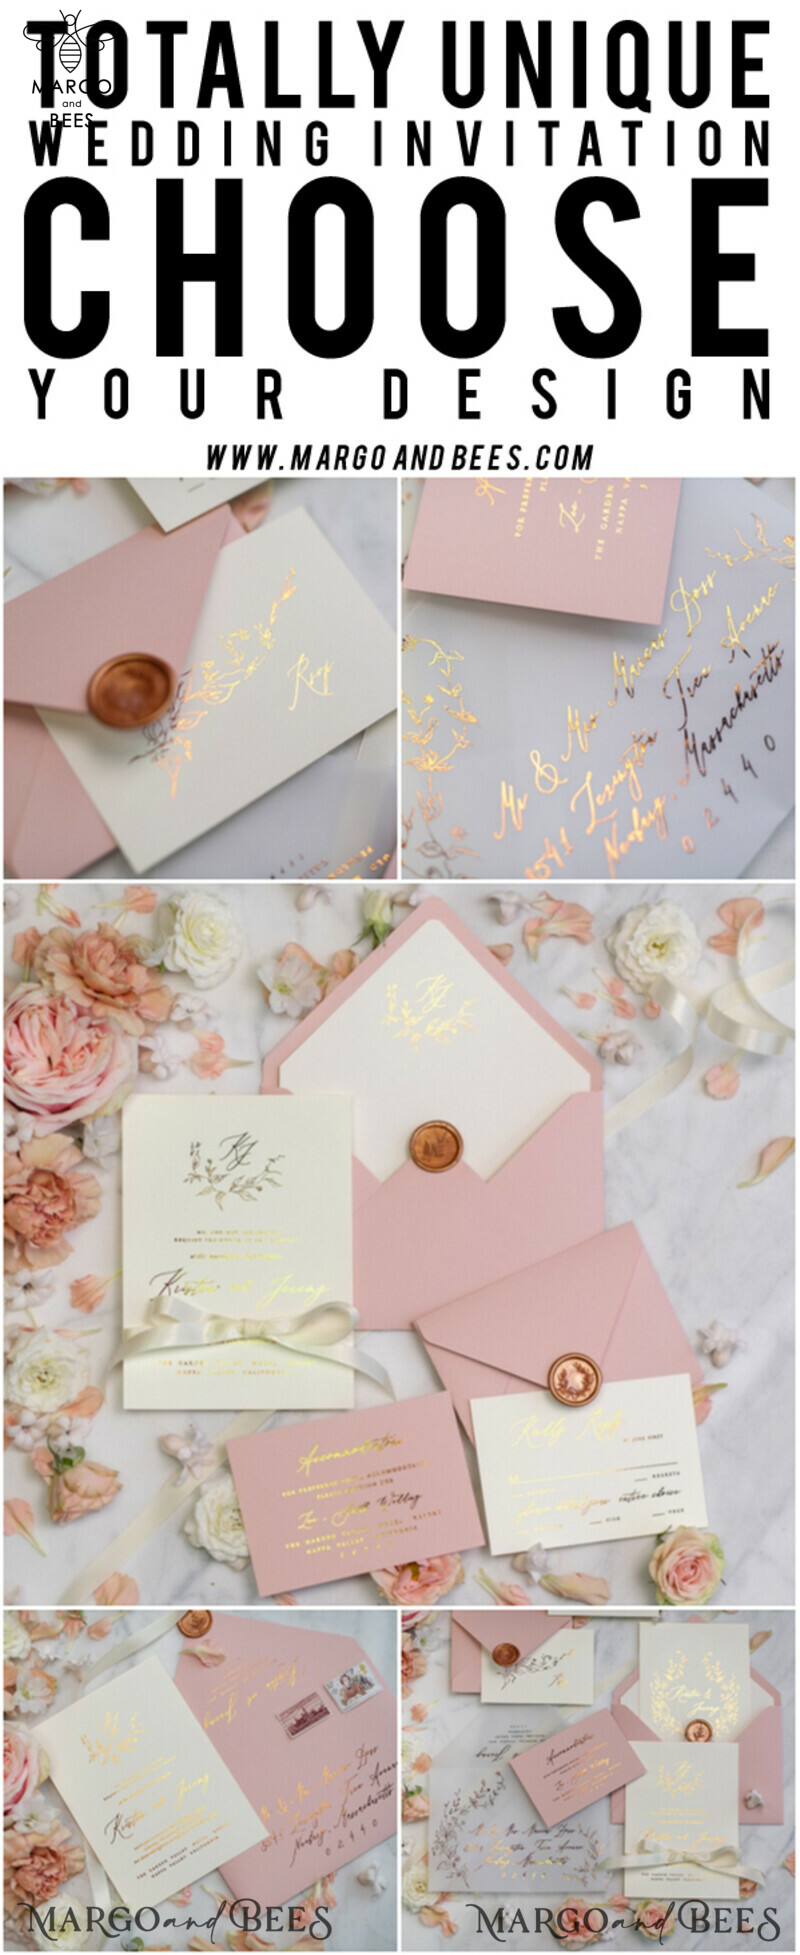 Bespoke Vellum Wedding Invitation Suite: Romantic Blush Pink and Glamour Gold Foil with Elegant Golden Touch-40